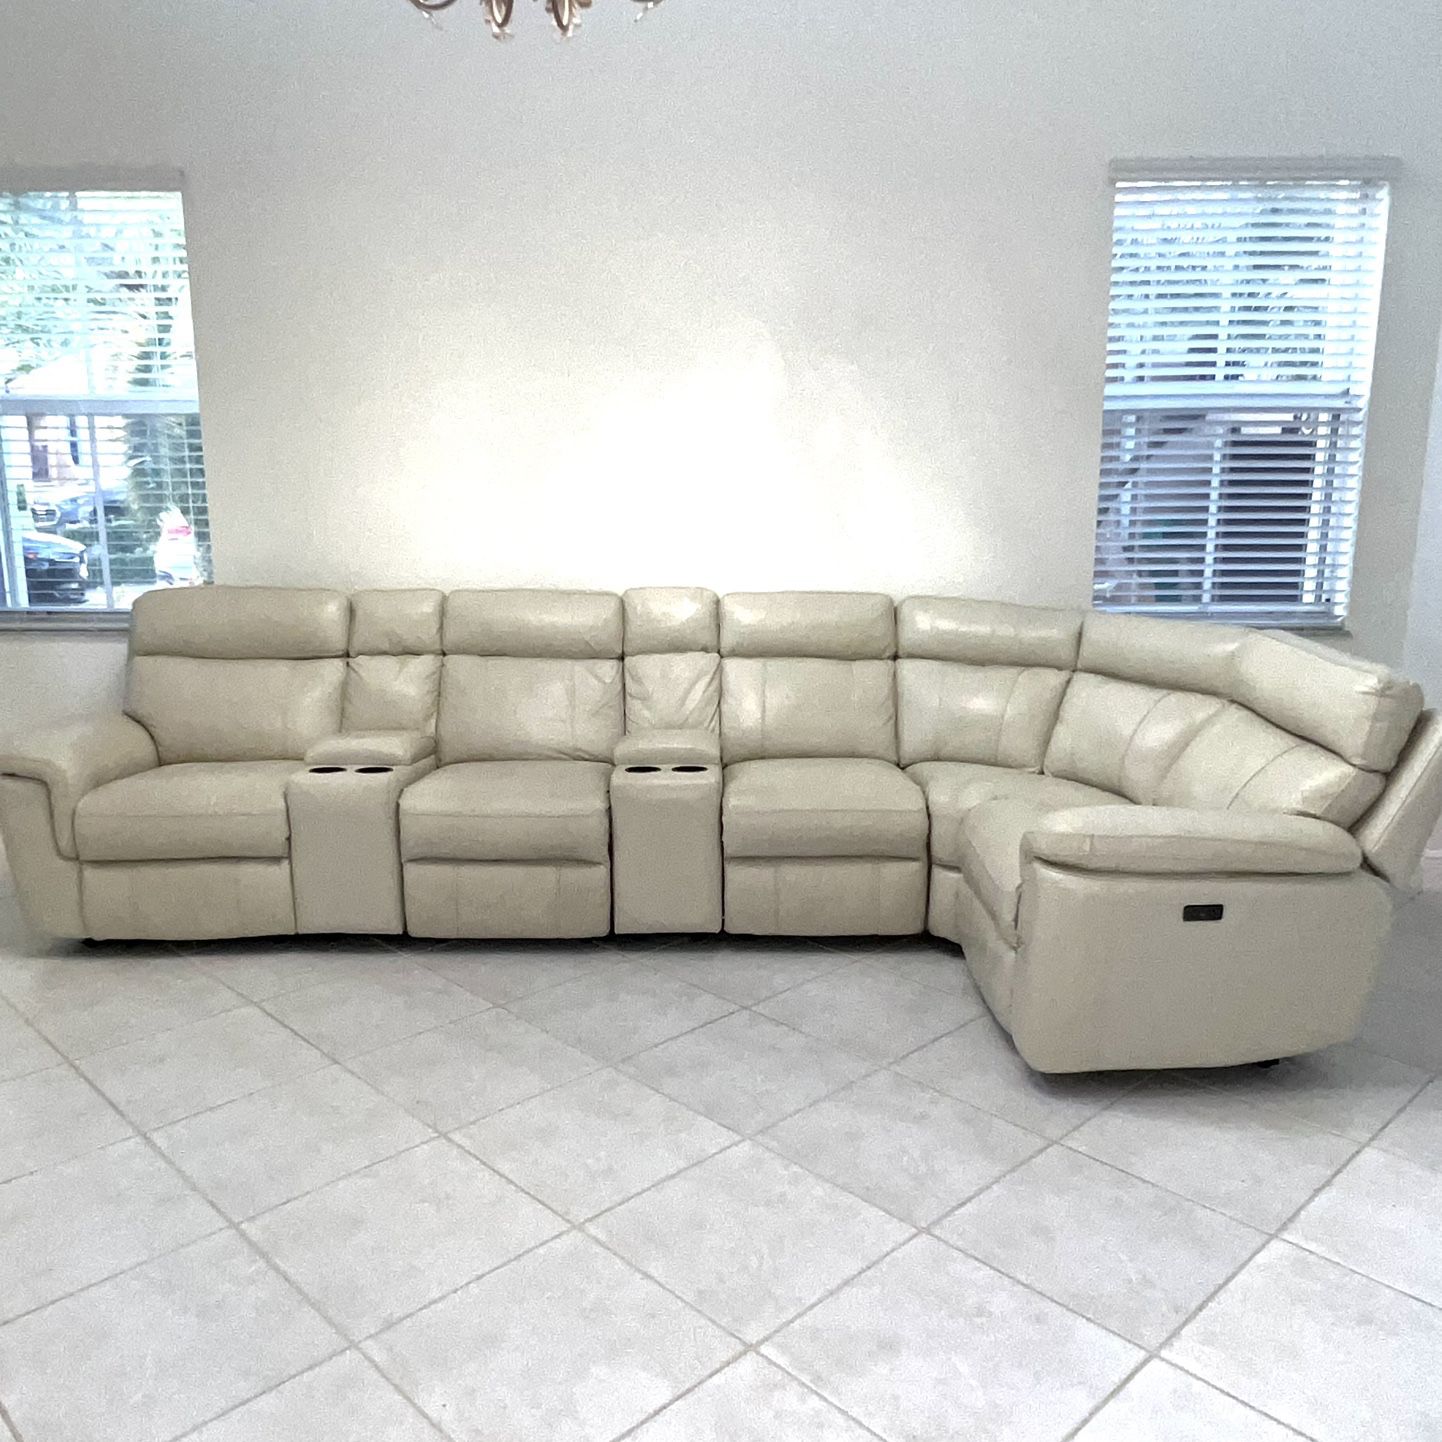 Rooms to Go 5-Piece Leather Cream Sectional